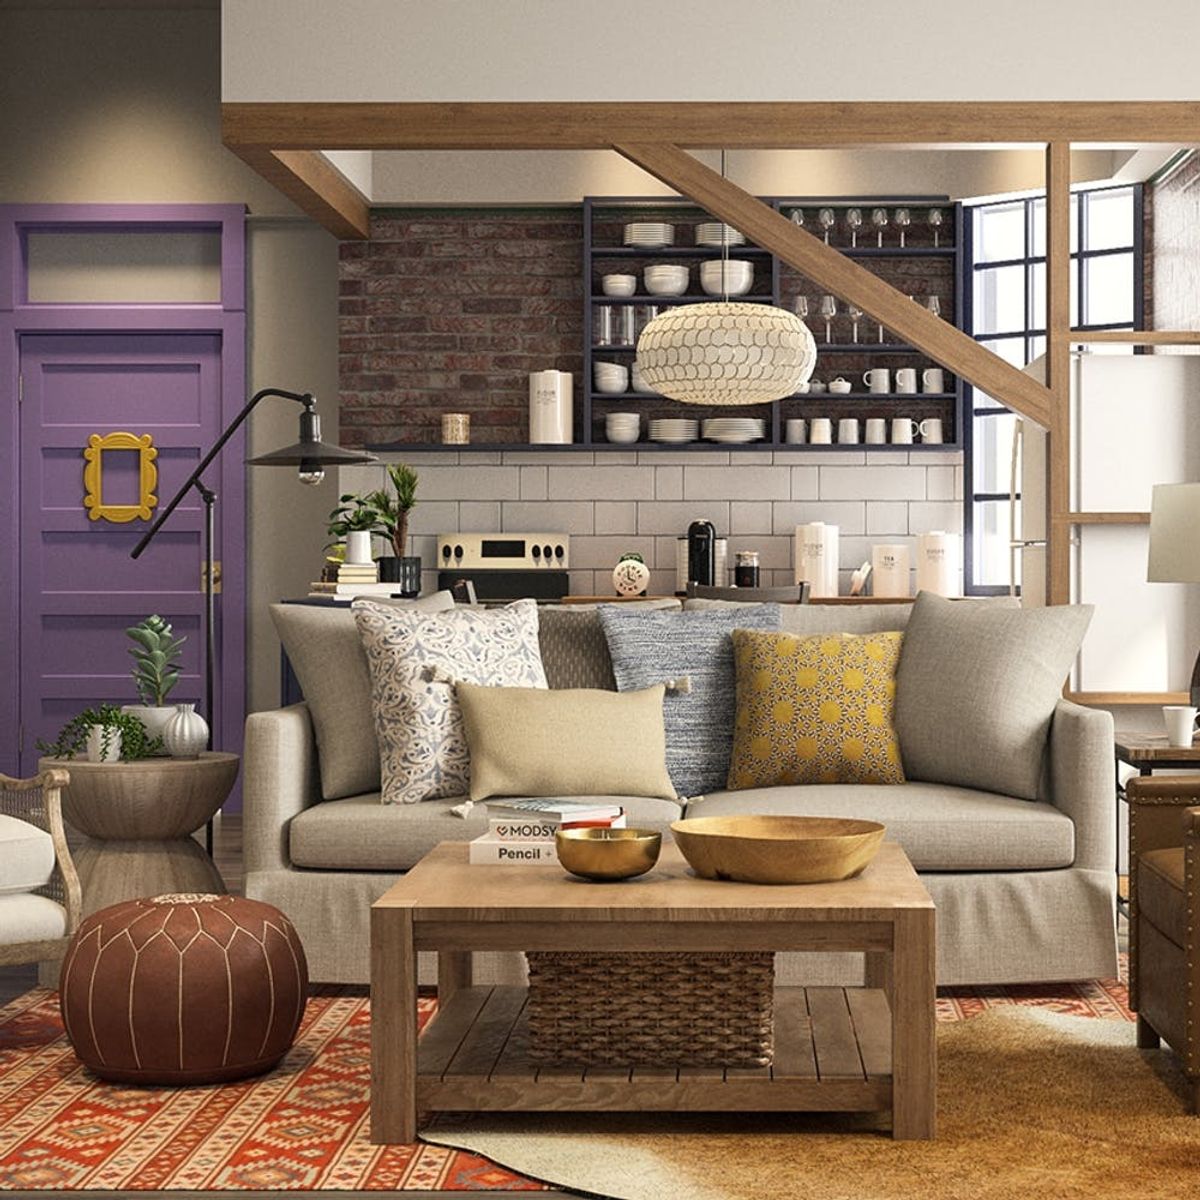 Here’s What Monica’s Apartment From ‘Friends’ Would Look Like Today